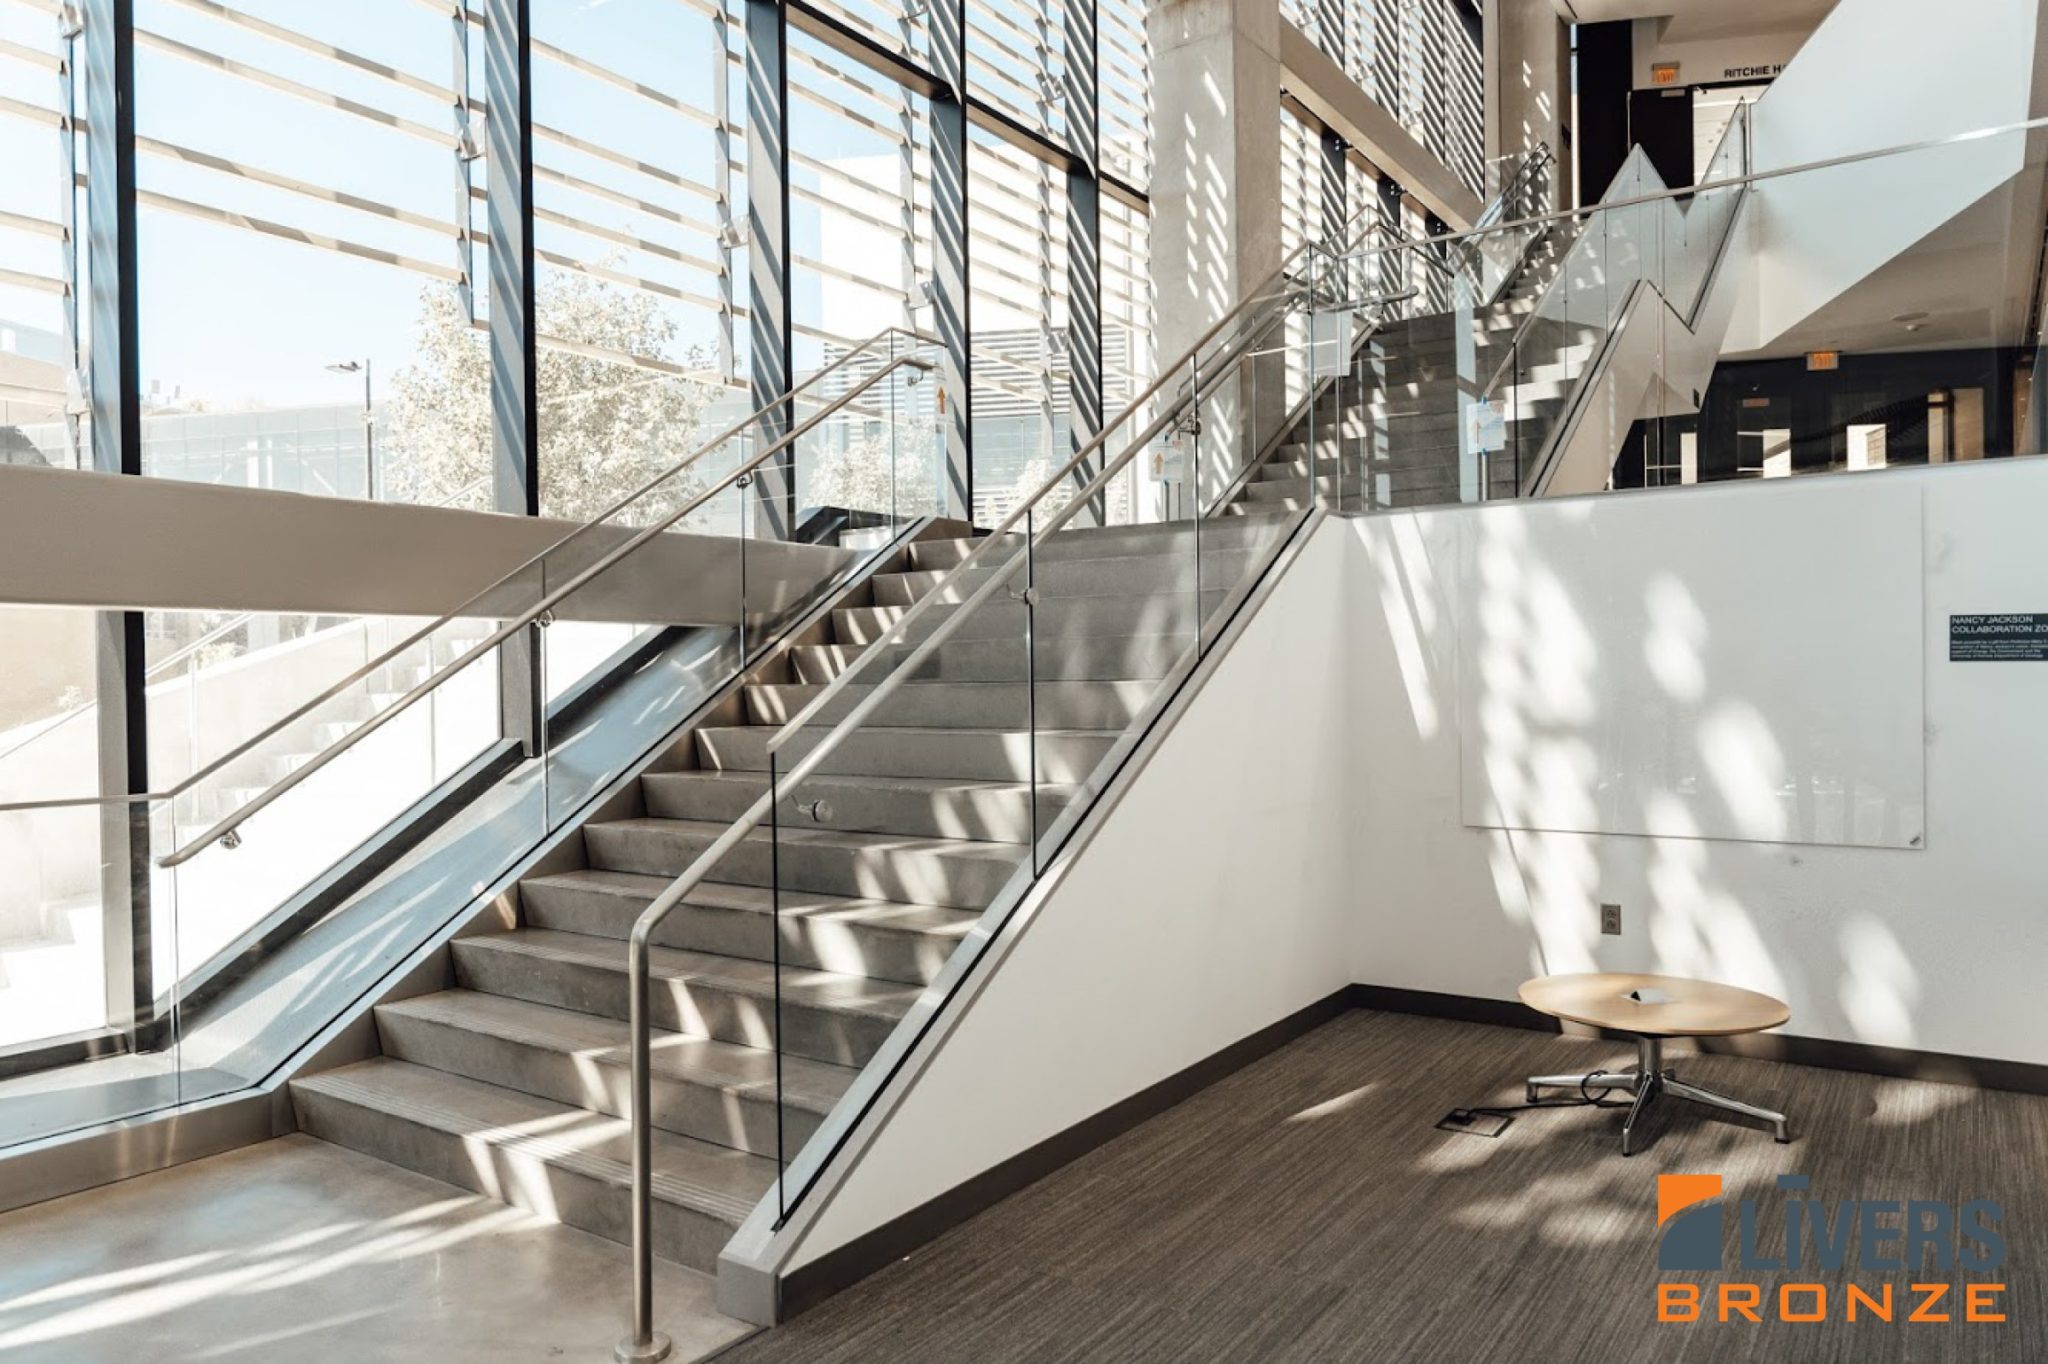 Livers Bronze Struct-U-Rail Commercial Glass Railing installed at Earth, Energy & Environment Center, University of Kansas Lobby Stairs Made in the USA